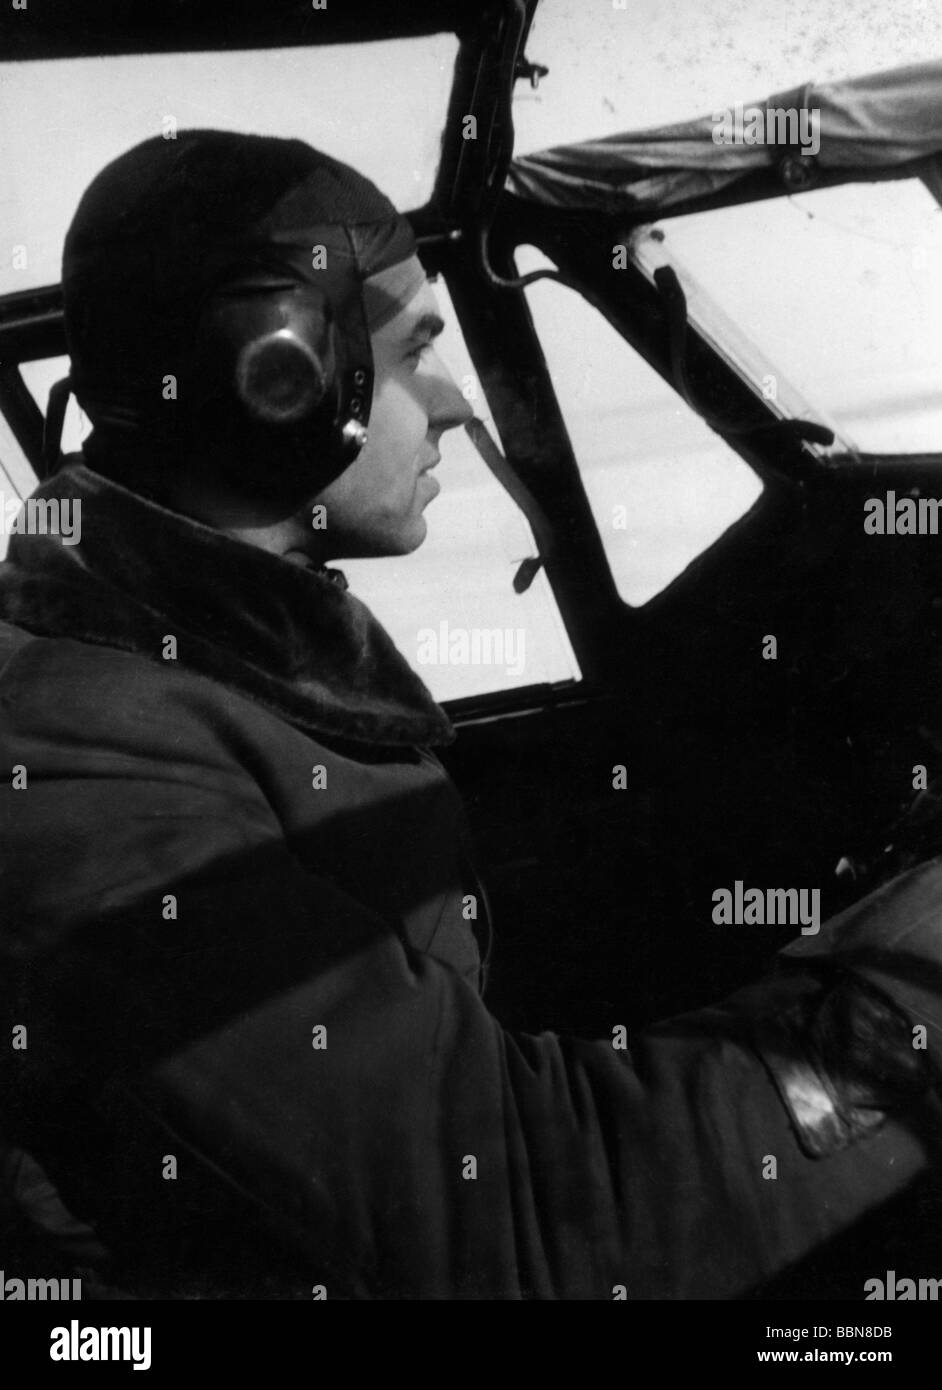 events, Second World War / WWII, aerial warfare, aircraft, details / interiors, the pilot of a German transport and reconnaissance aircraft Focke-Wulf Fw 200 'Condor' in the cockpit, Southern Germany, 11.2.1943, Stock Photo